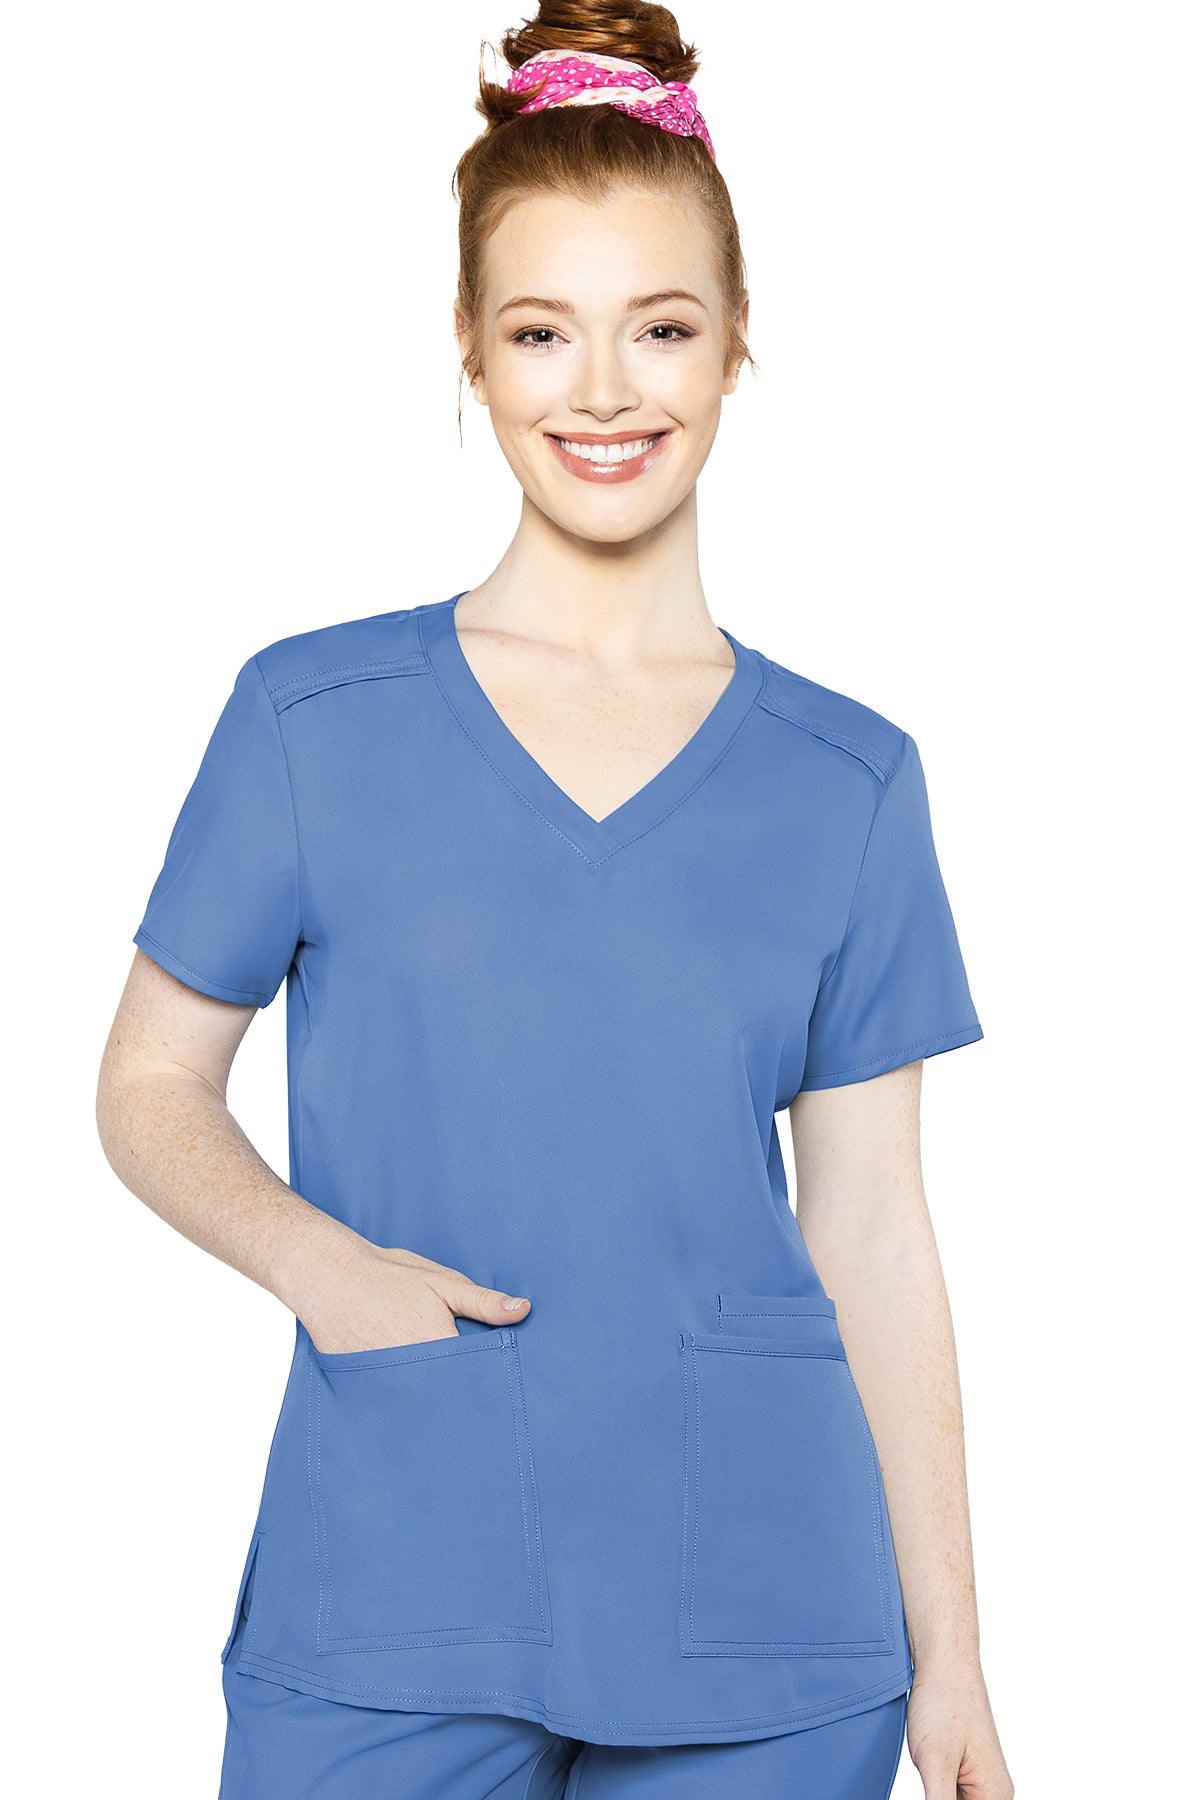 Med Couture Scrub Top Insight Classic V-Neck 3 Pocket in Ceil at Parker's Clothing and Shoes.